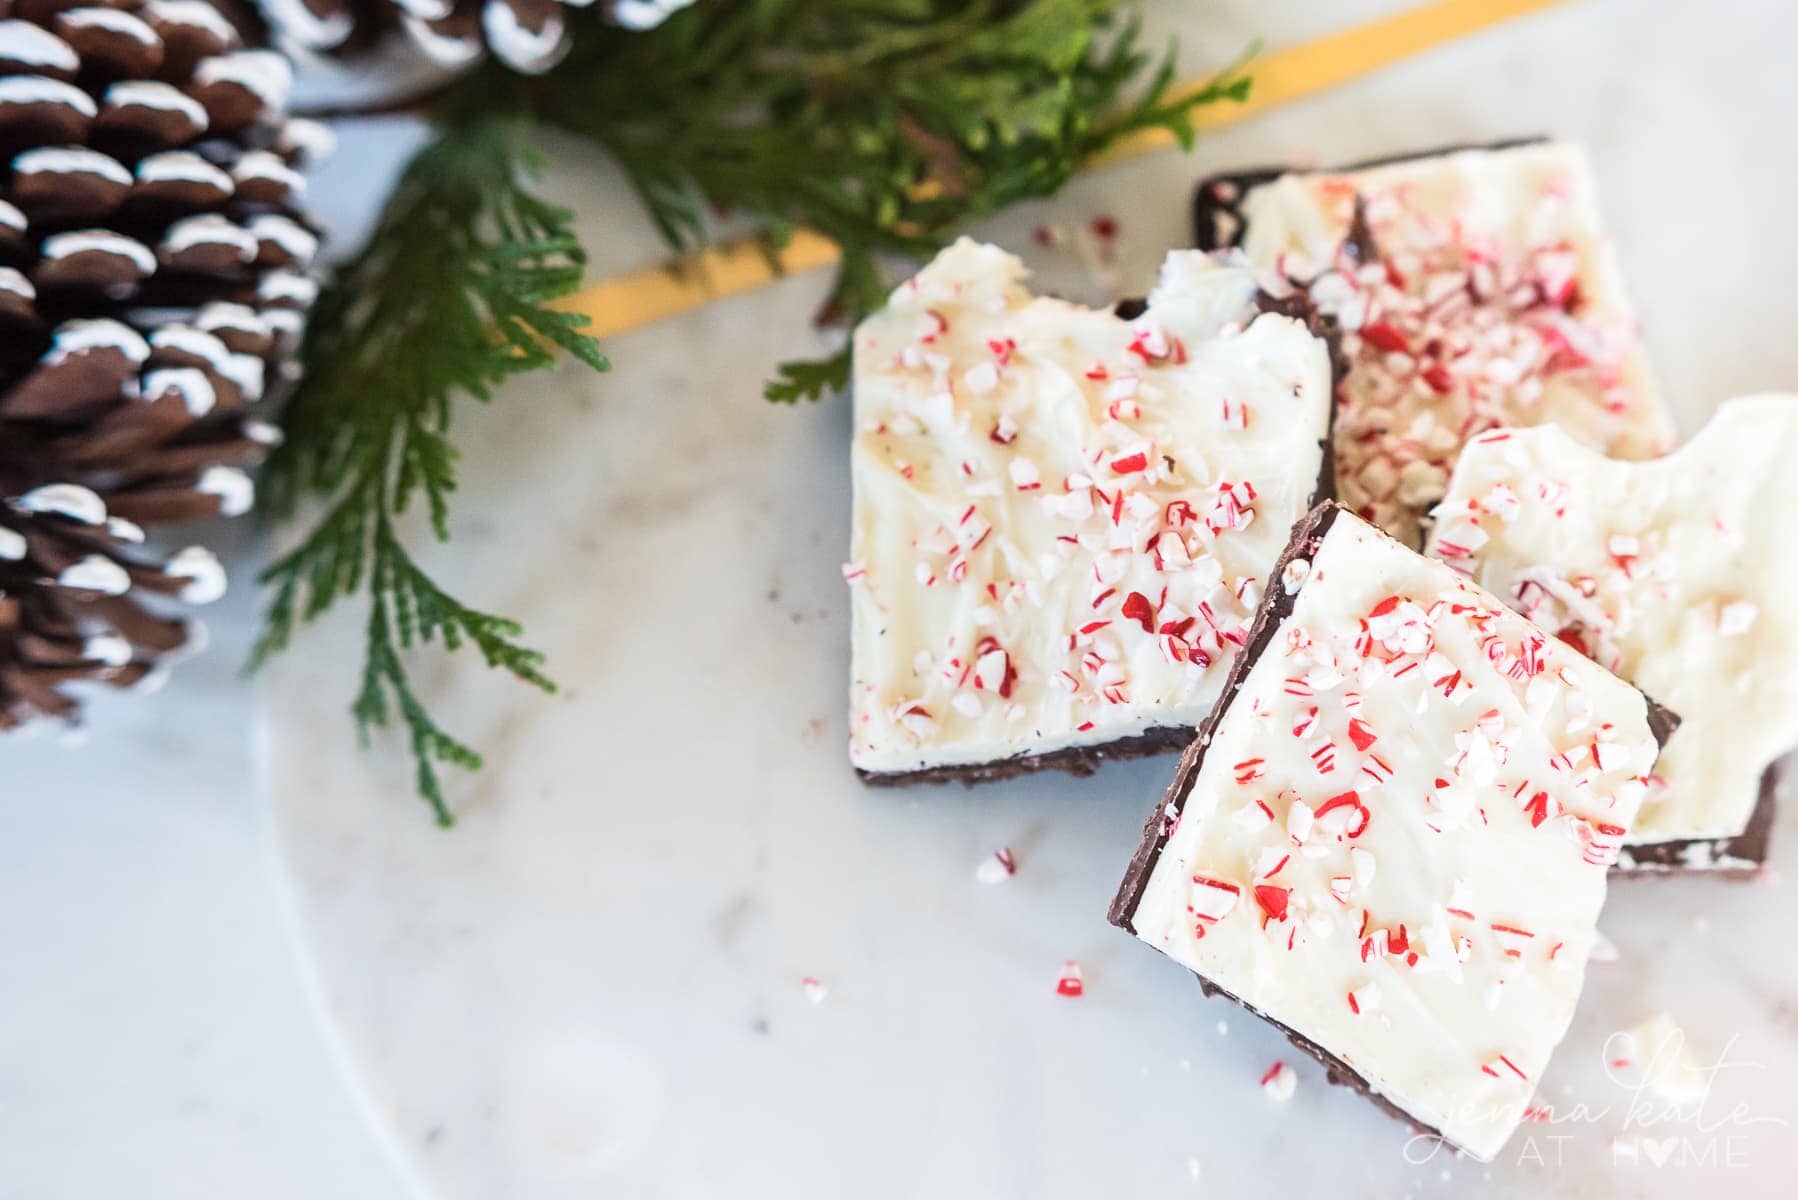 How to make your own peppermint bark with Ghiradelli chocolate bakig bars